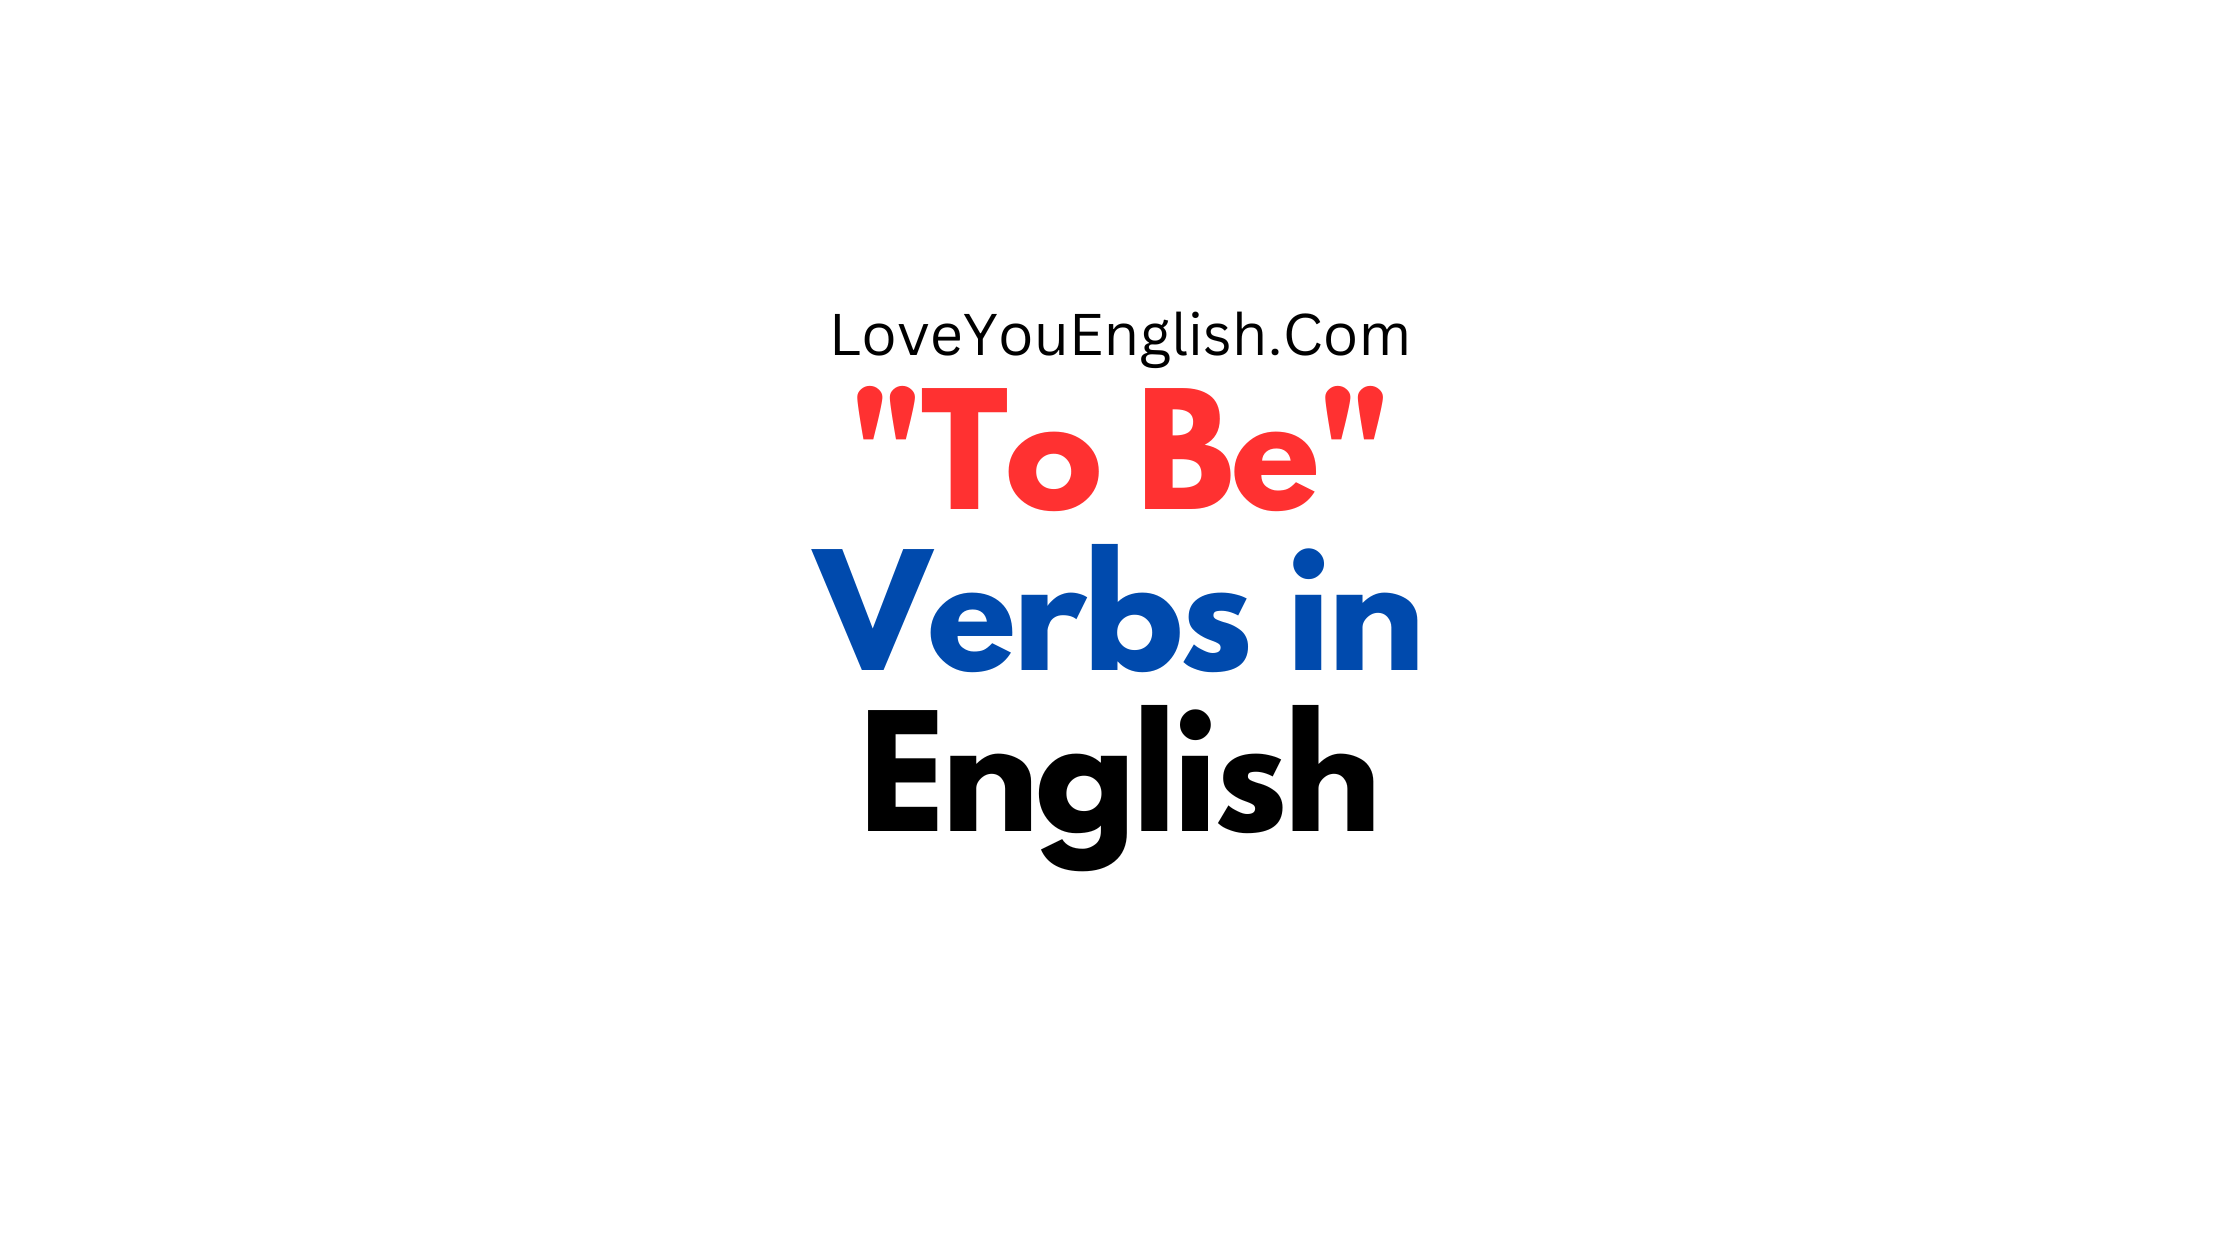 "To Be" Verbs in English